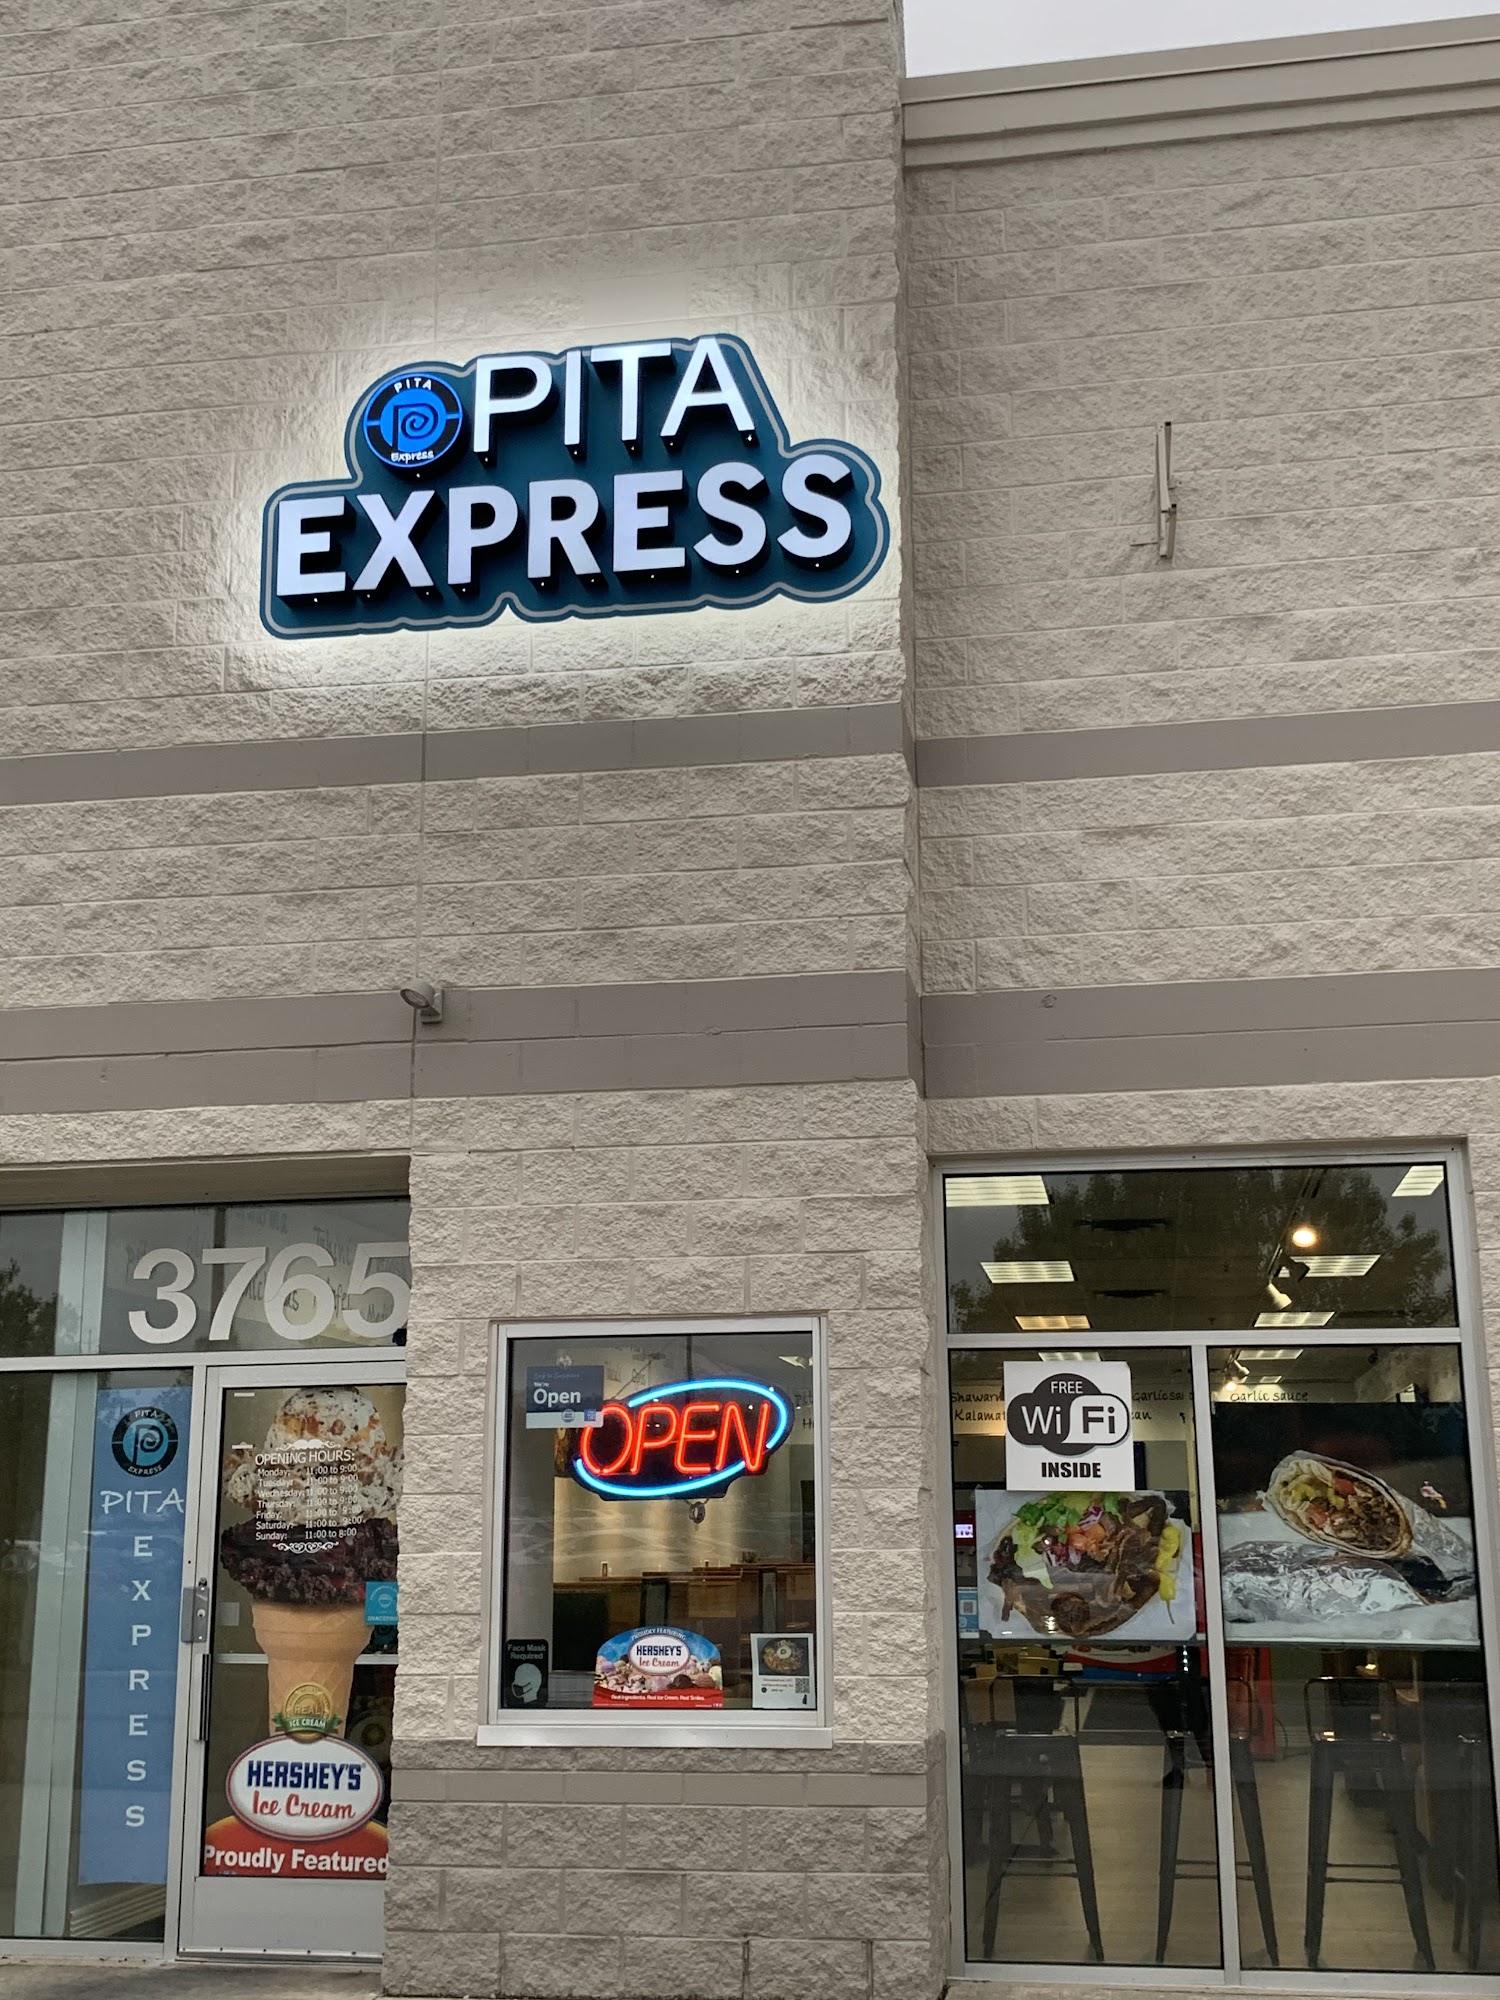 Pita express and Catering